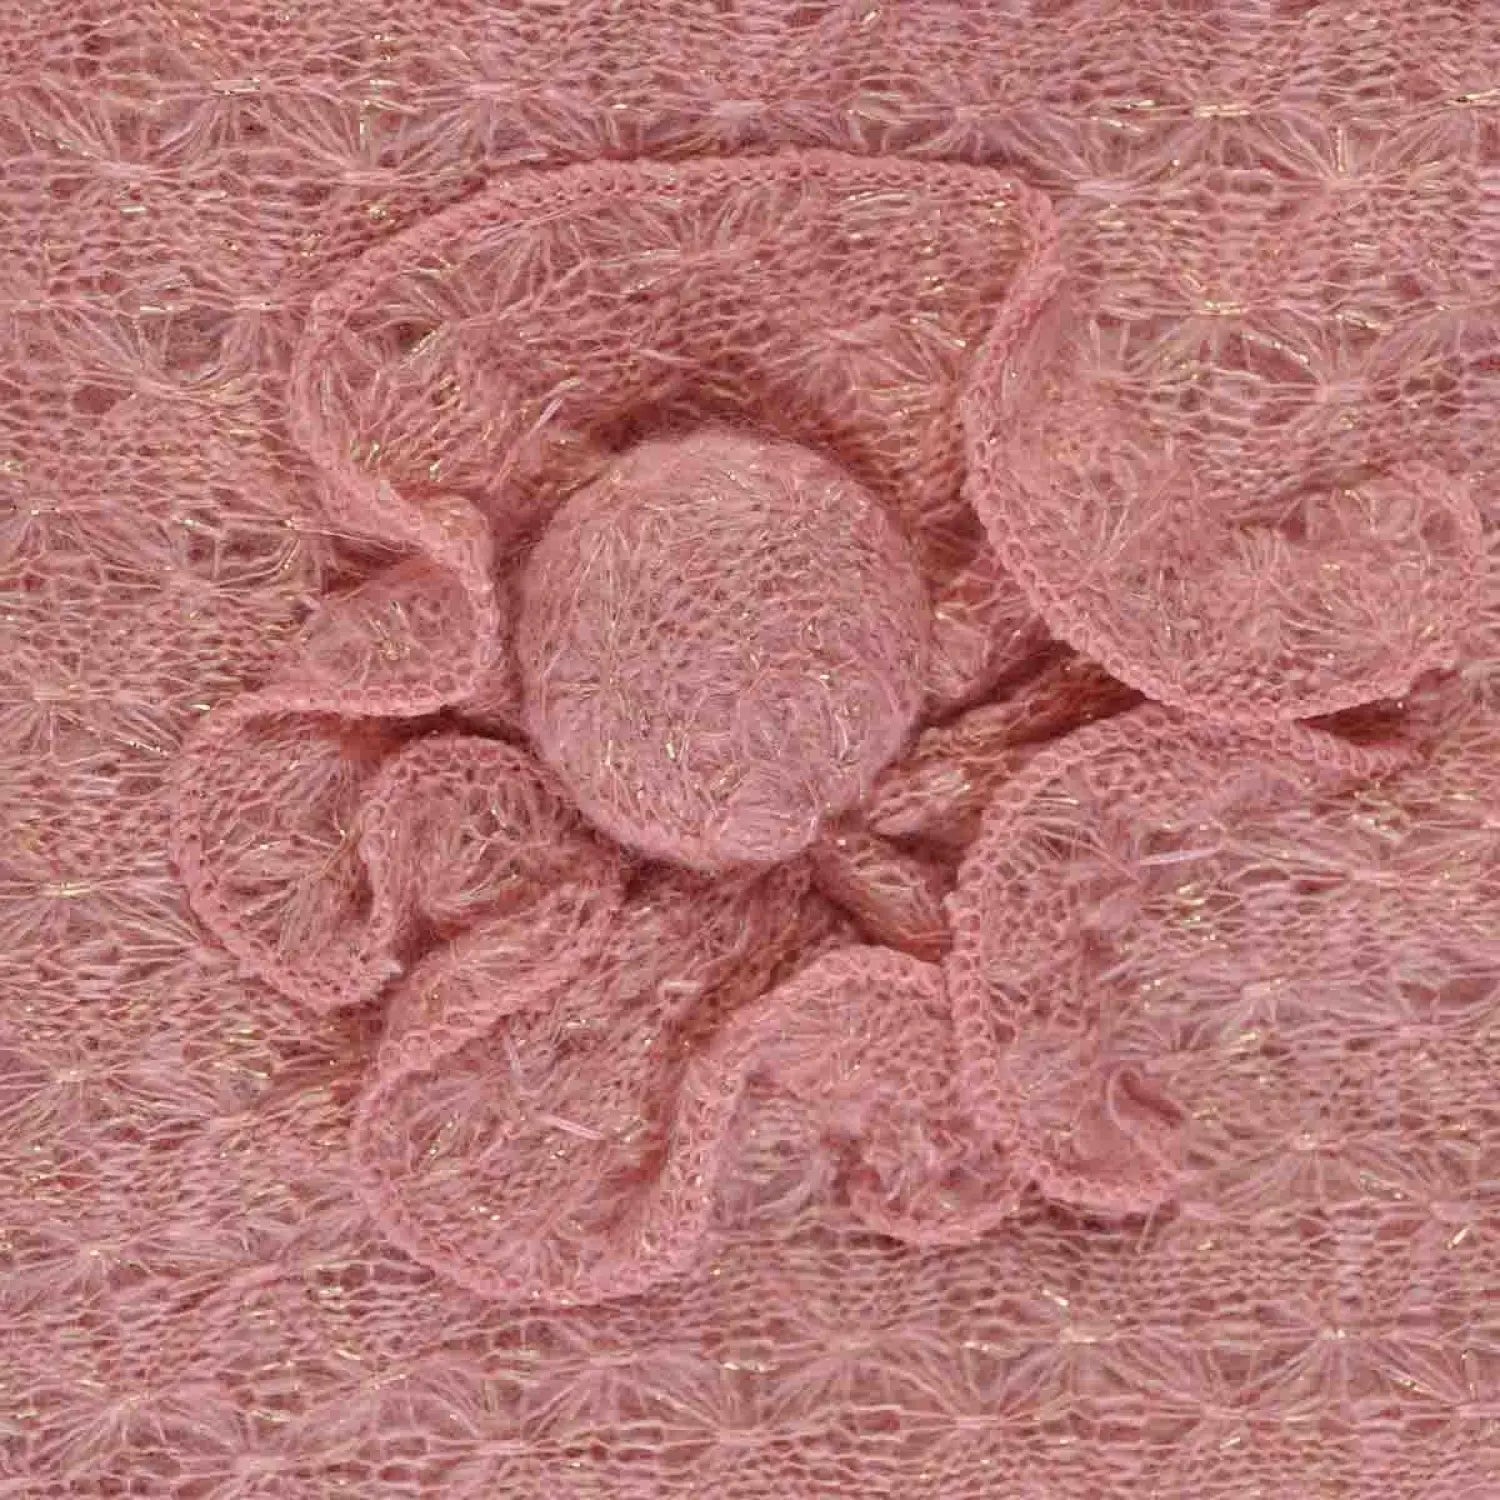 Pink lace fabric scarf with attached flower, knitted shimmering lightweight design